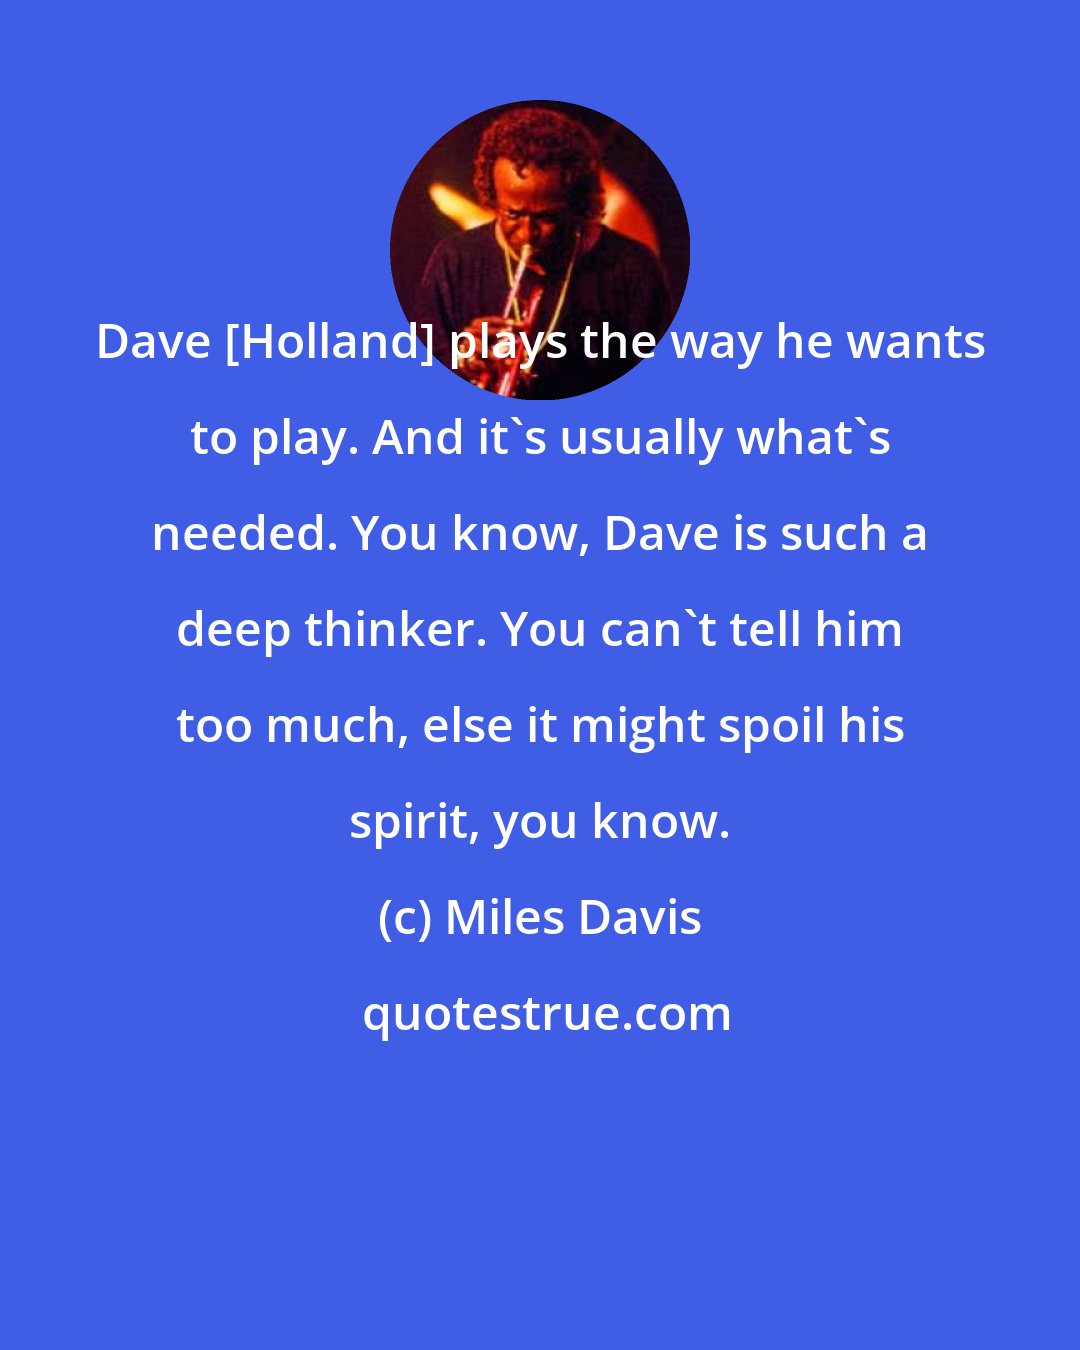 Miles Davis: Dave [Holland] plays the way he wants to play. And it's usually what's needed. You know, Dave is such a deep thinker. You can't tell him too much, else it might spoil his spirit, you know.